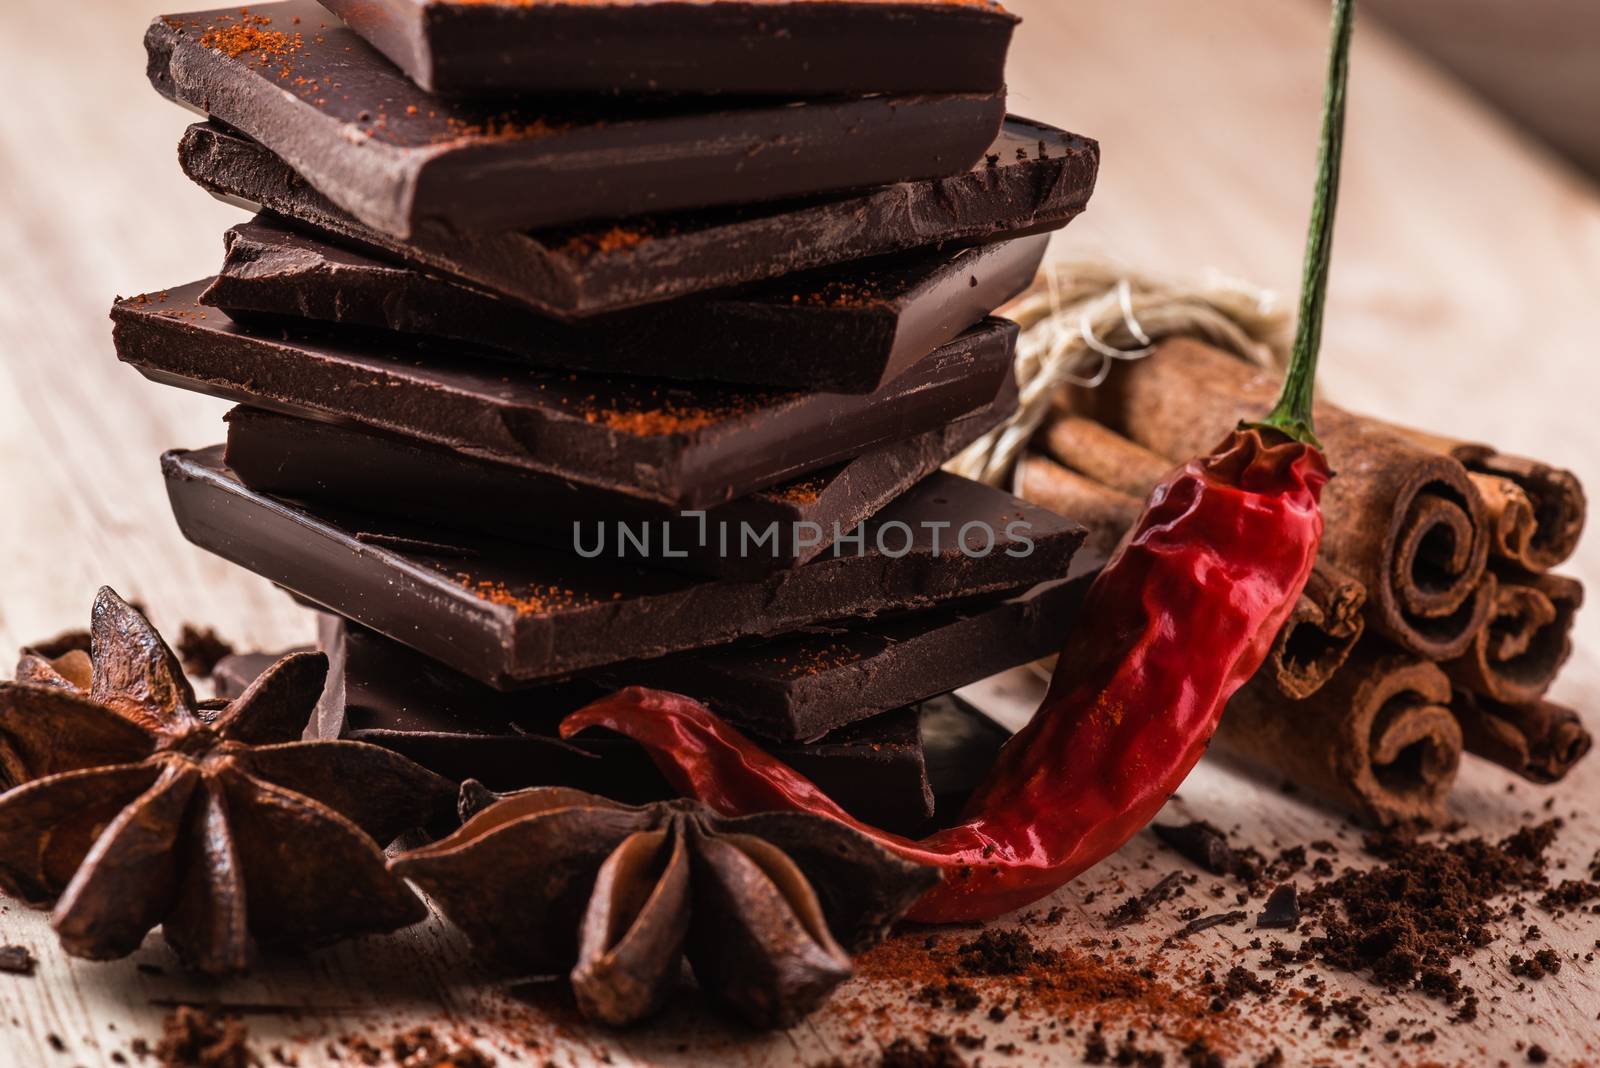 Dry Chili Pepper with Chocolate and Condiments by Seva_blsv